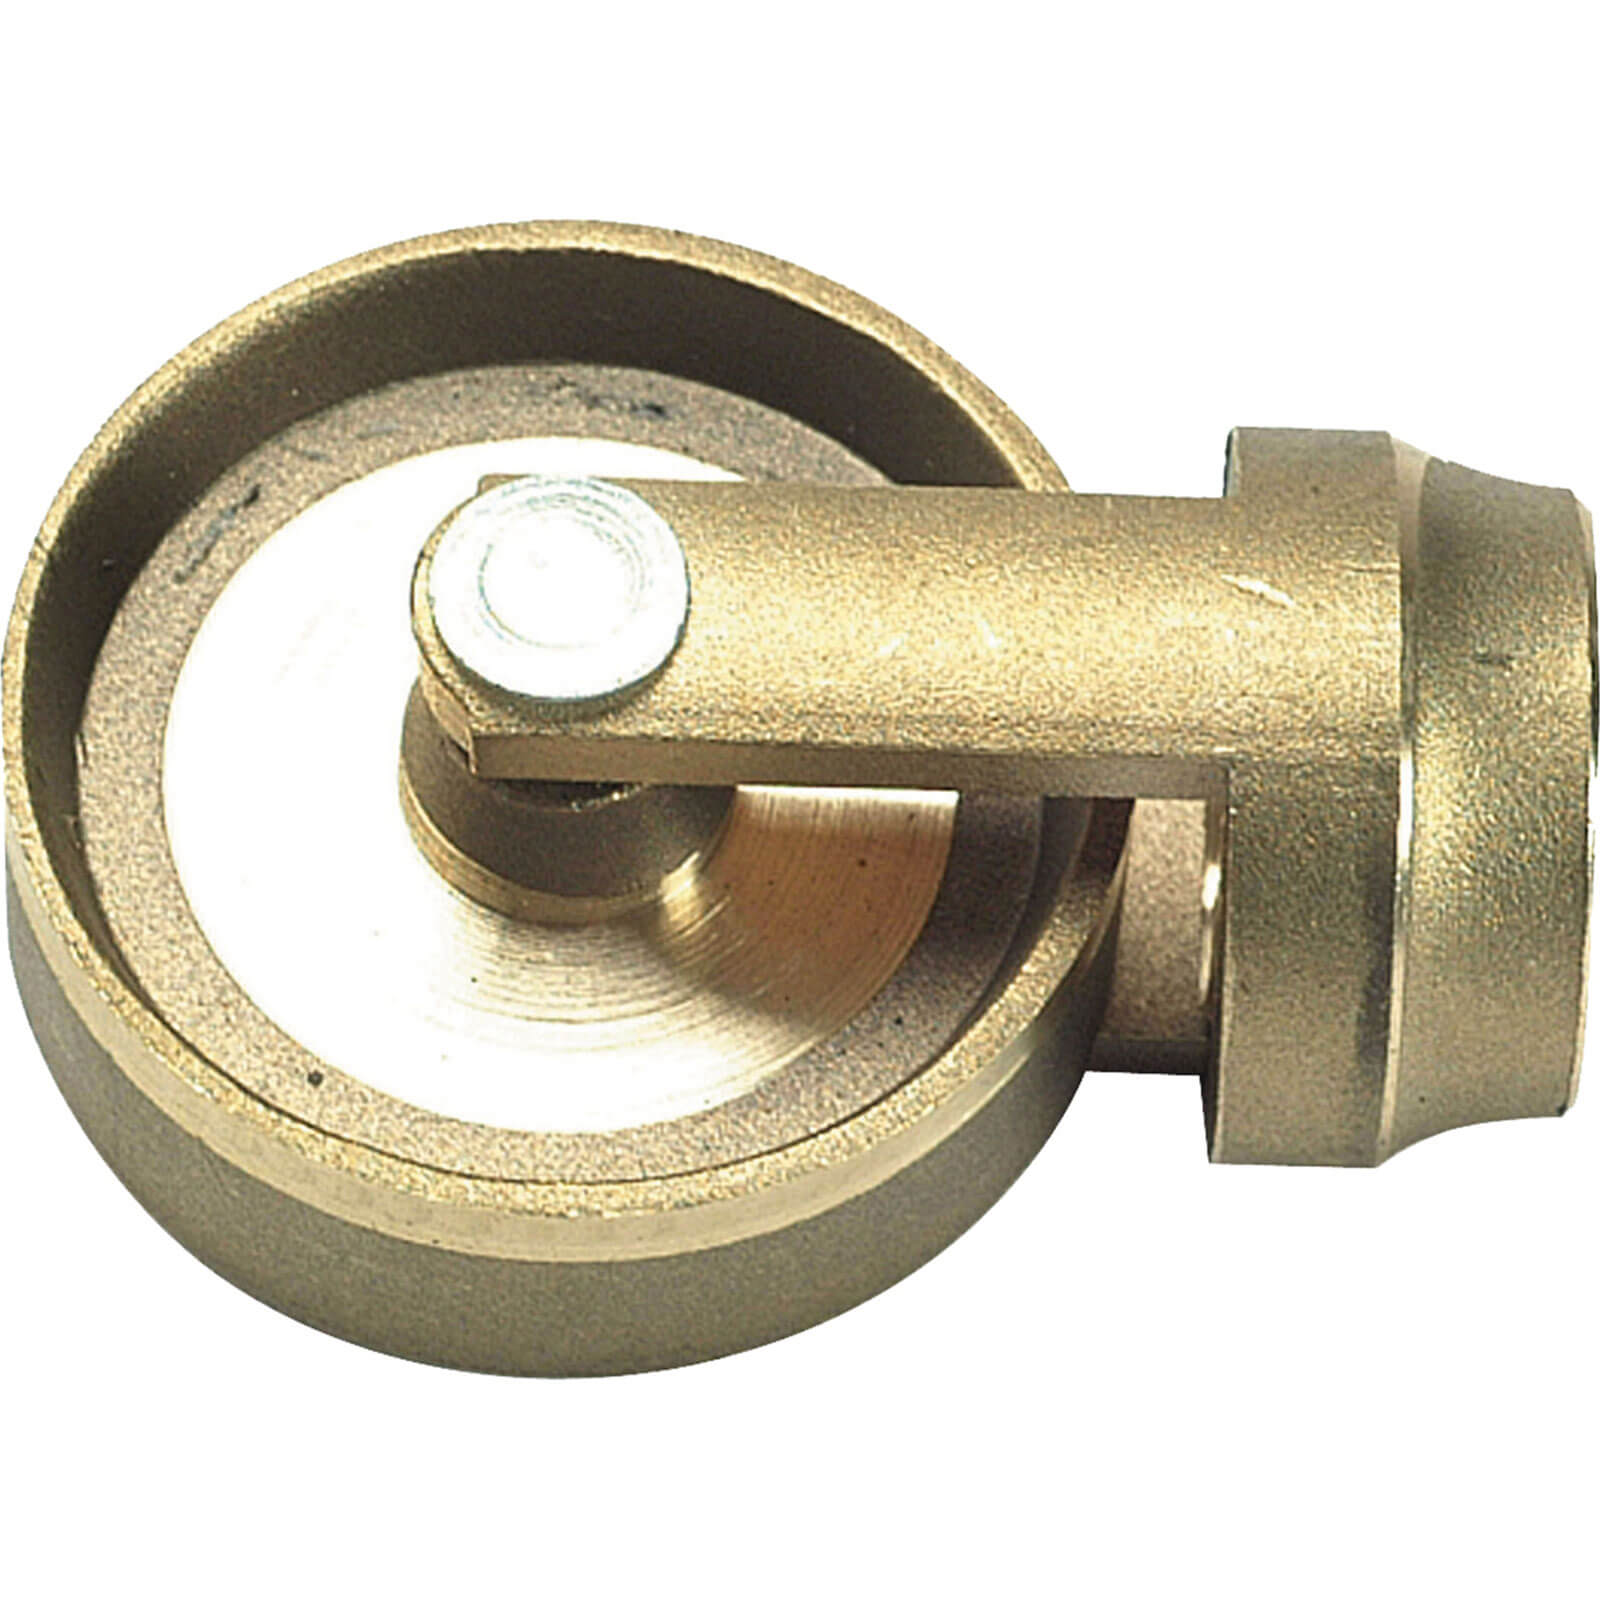 Photo of Bailey 1770 Lock Fast Cleaning Rod Guide Wheel